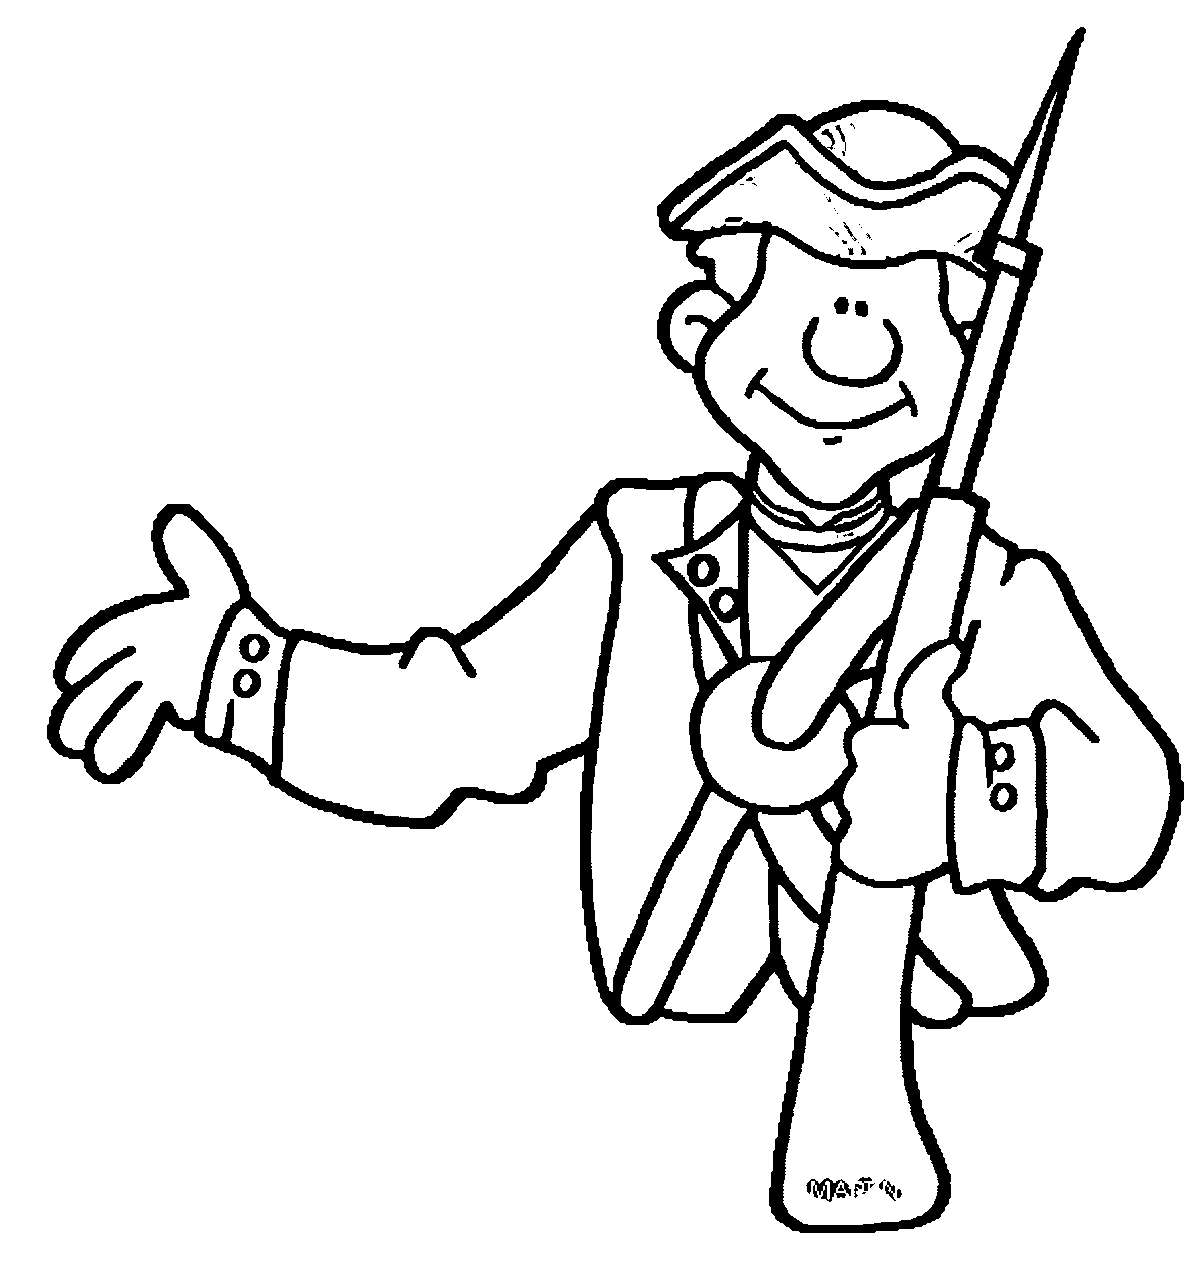 Revolutionary War Soldier Coloring Page - Coloring Home